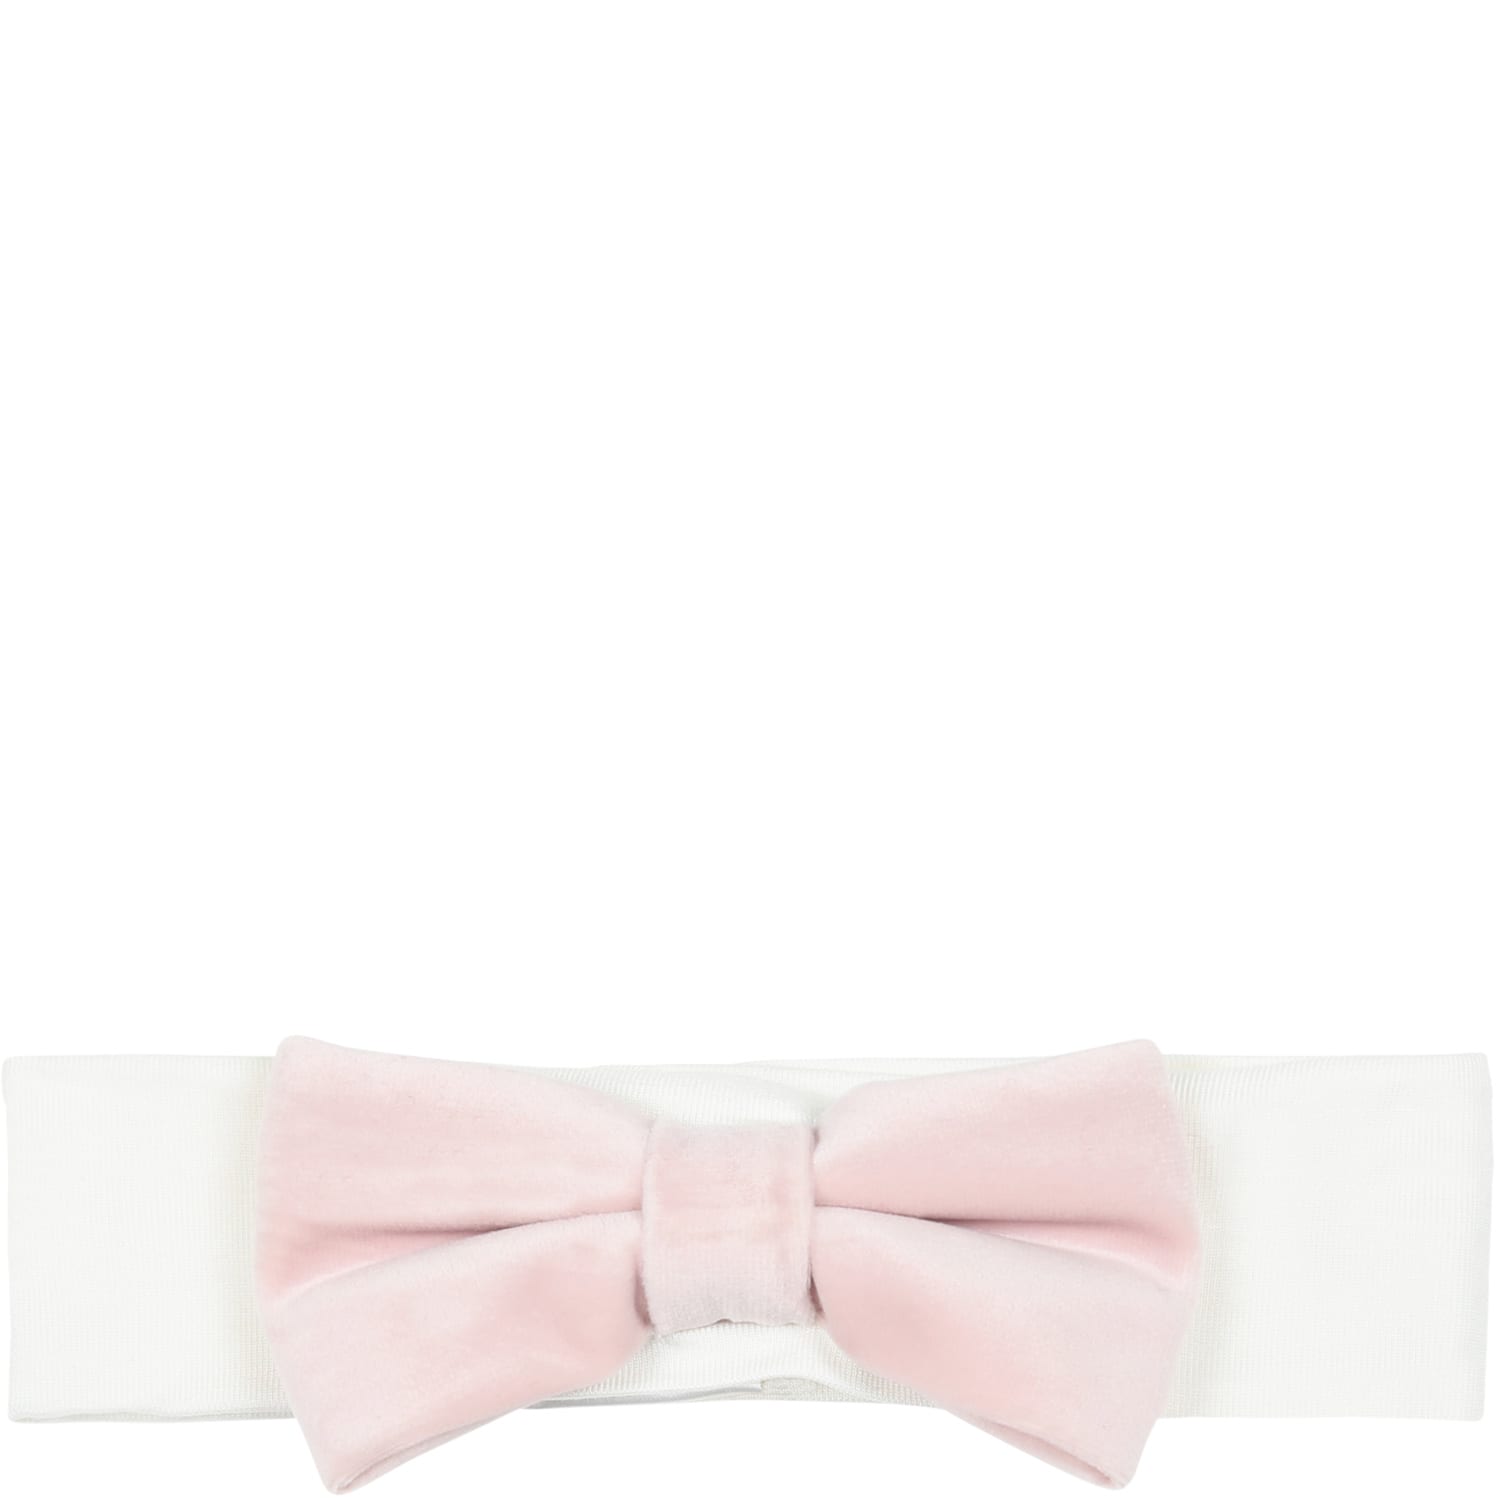 La stupenderia White Headband Decorated With Pink Velvet Bow On The Front.